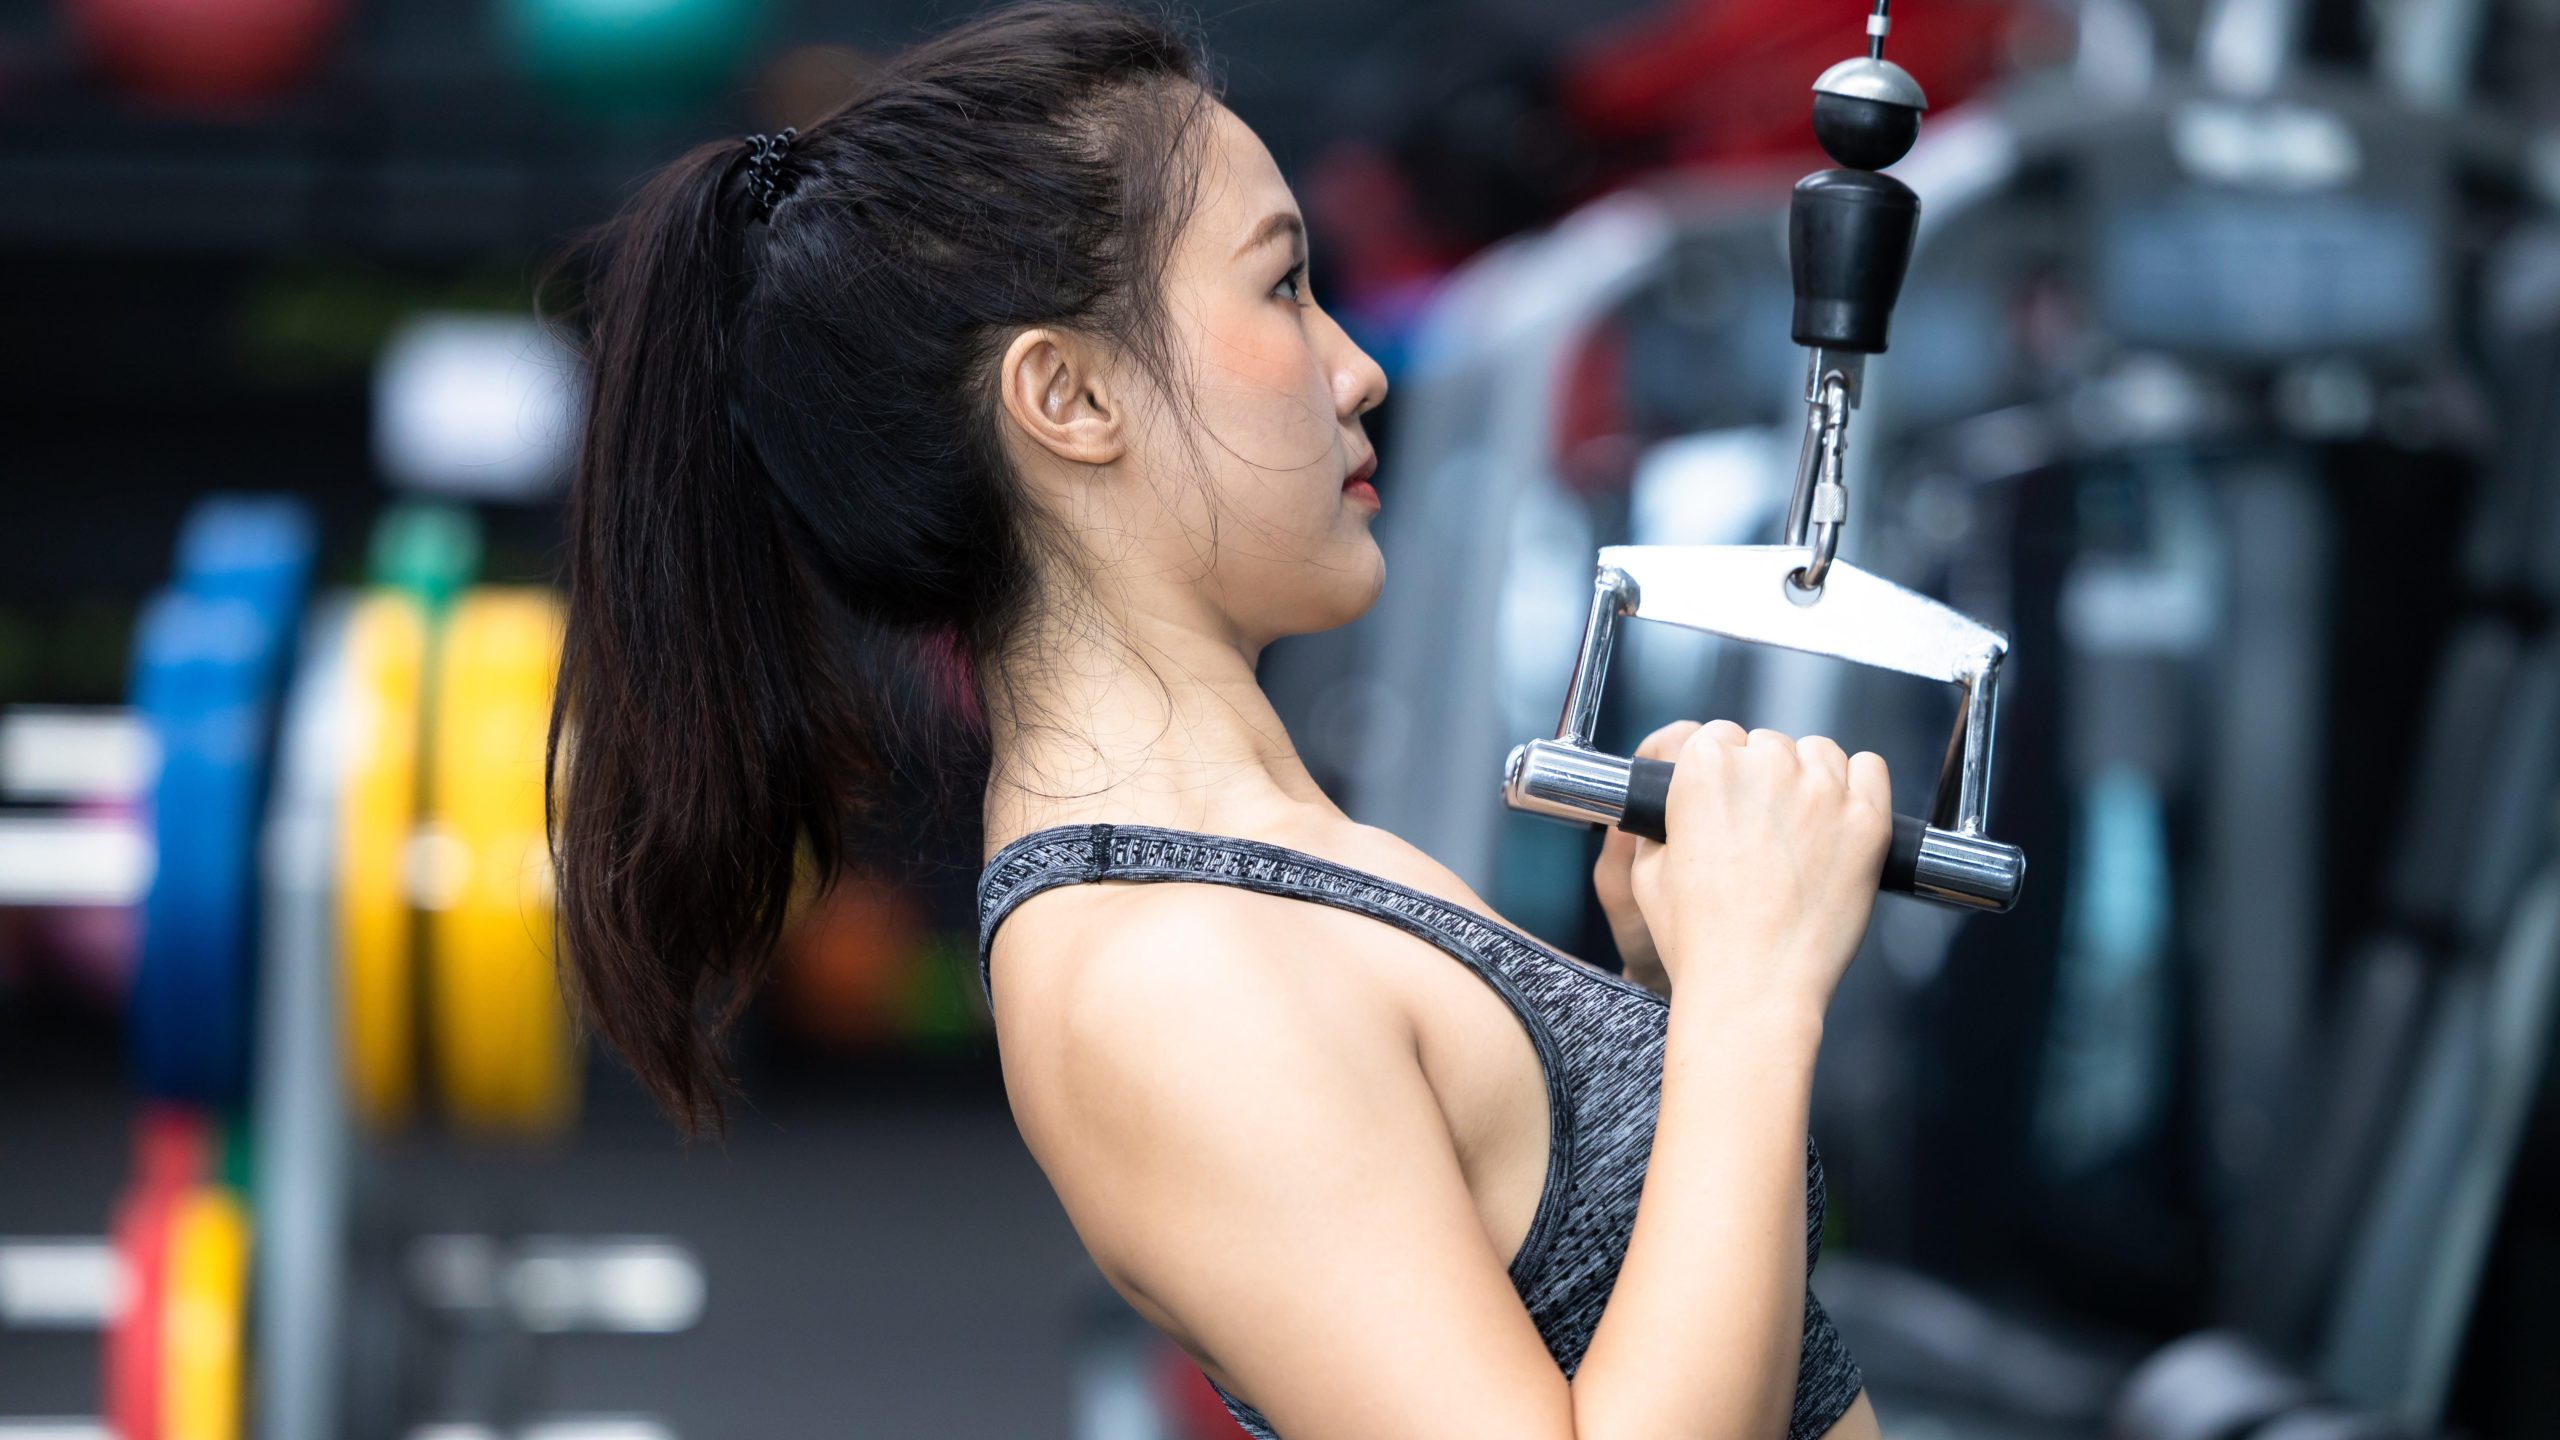 How to Use All Those Weird Cable Attachments at the Gym